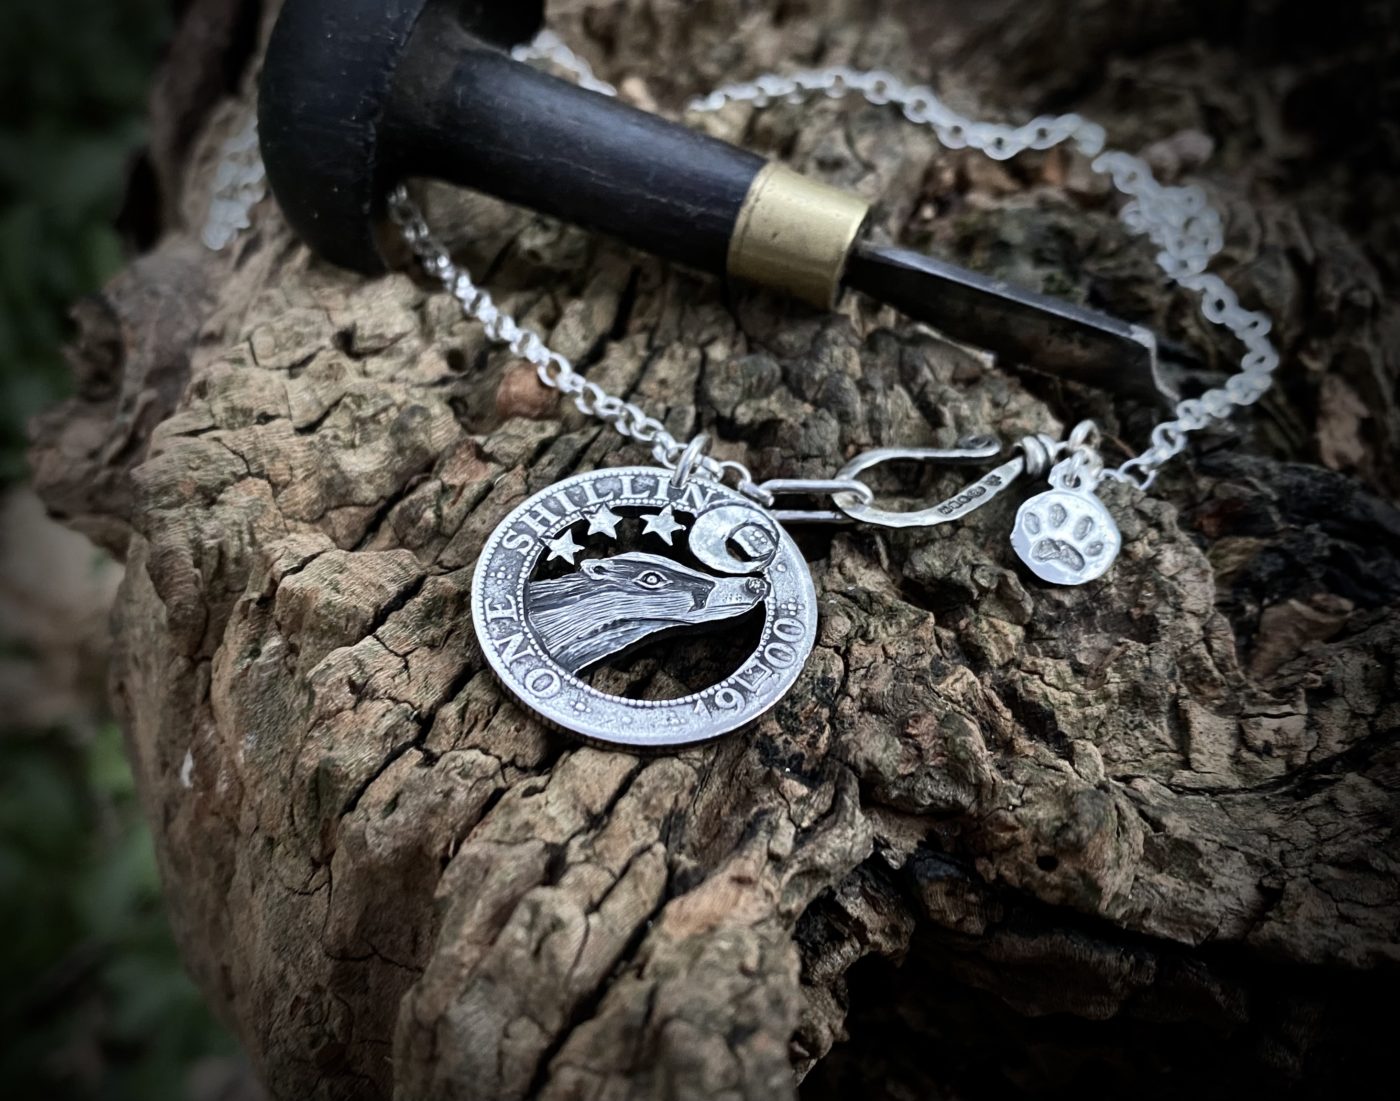 Handcrafted and recycled silver shilling The Silver Shilling collection. silver badger necklace totally handcrafted and recycled from old sterling silver shilling coins. Designed and created by Hairy Growler Jewellery, Cambridge, UK. necklace